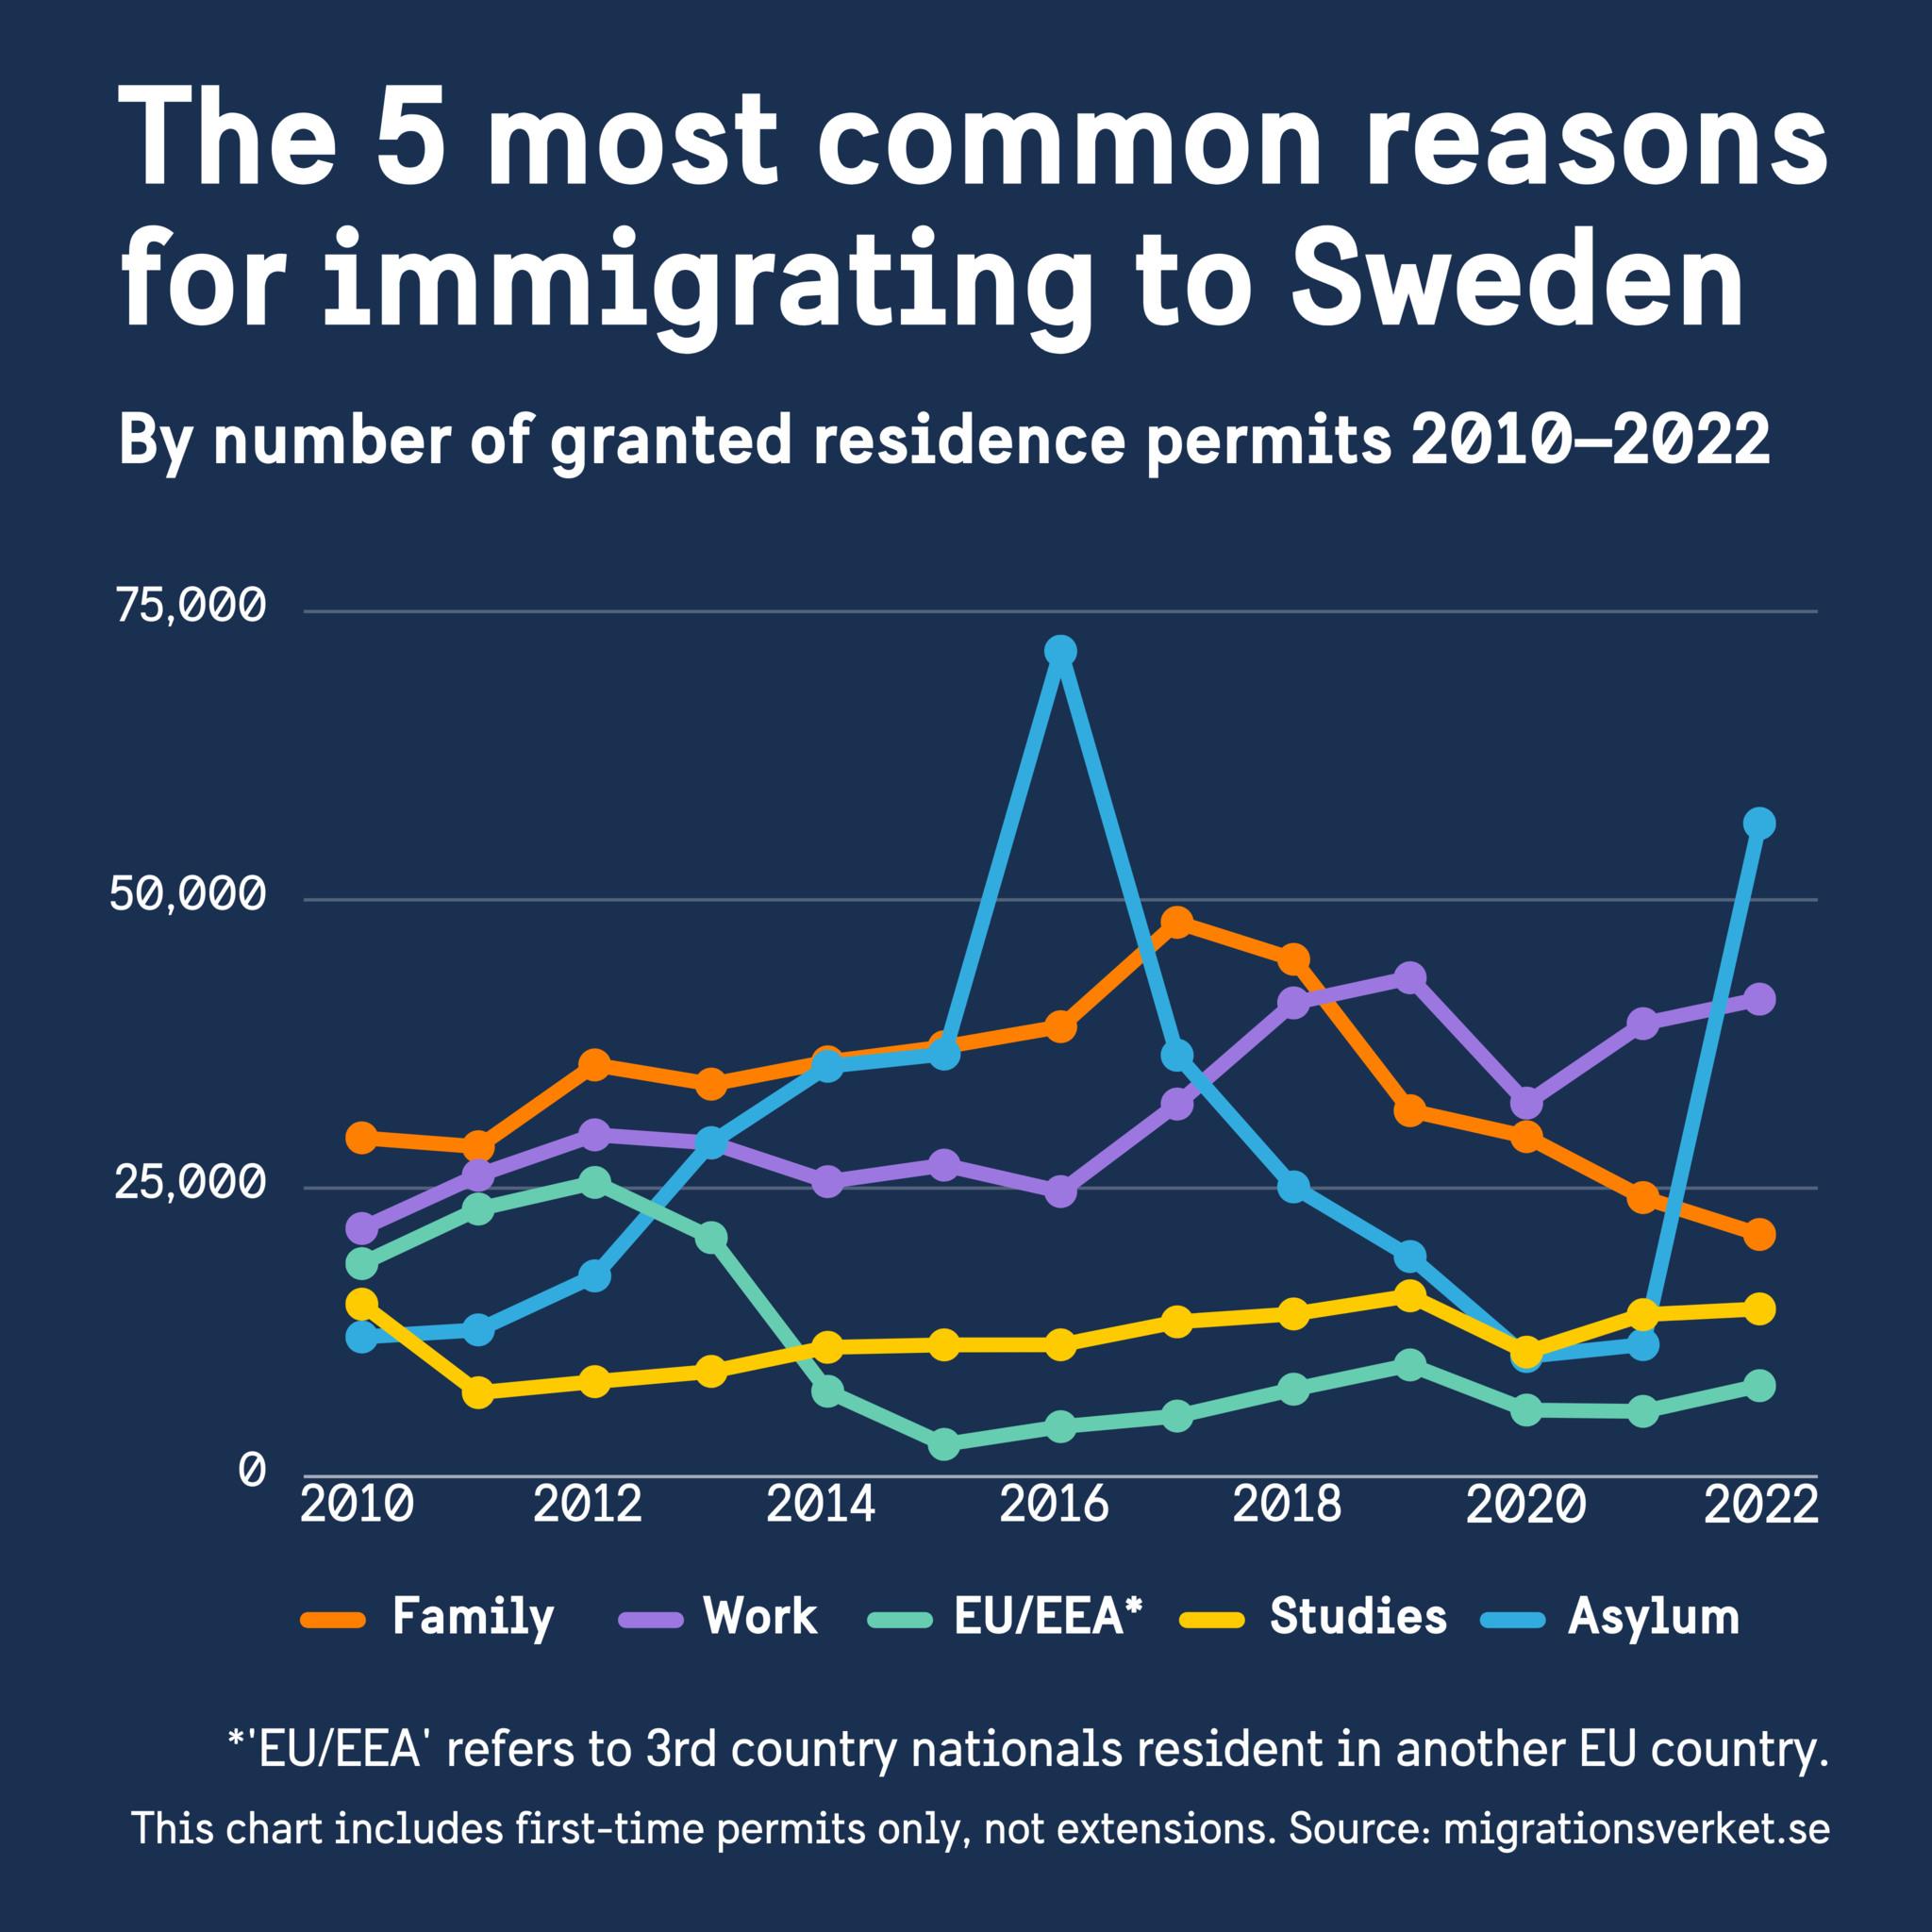 Chart showing the five most common reasons for migrating to Sweden: asylum, family, work, studies and EU/EEA.